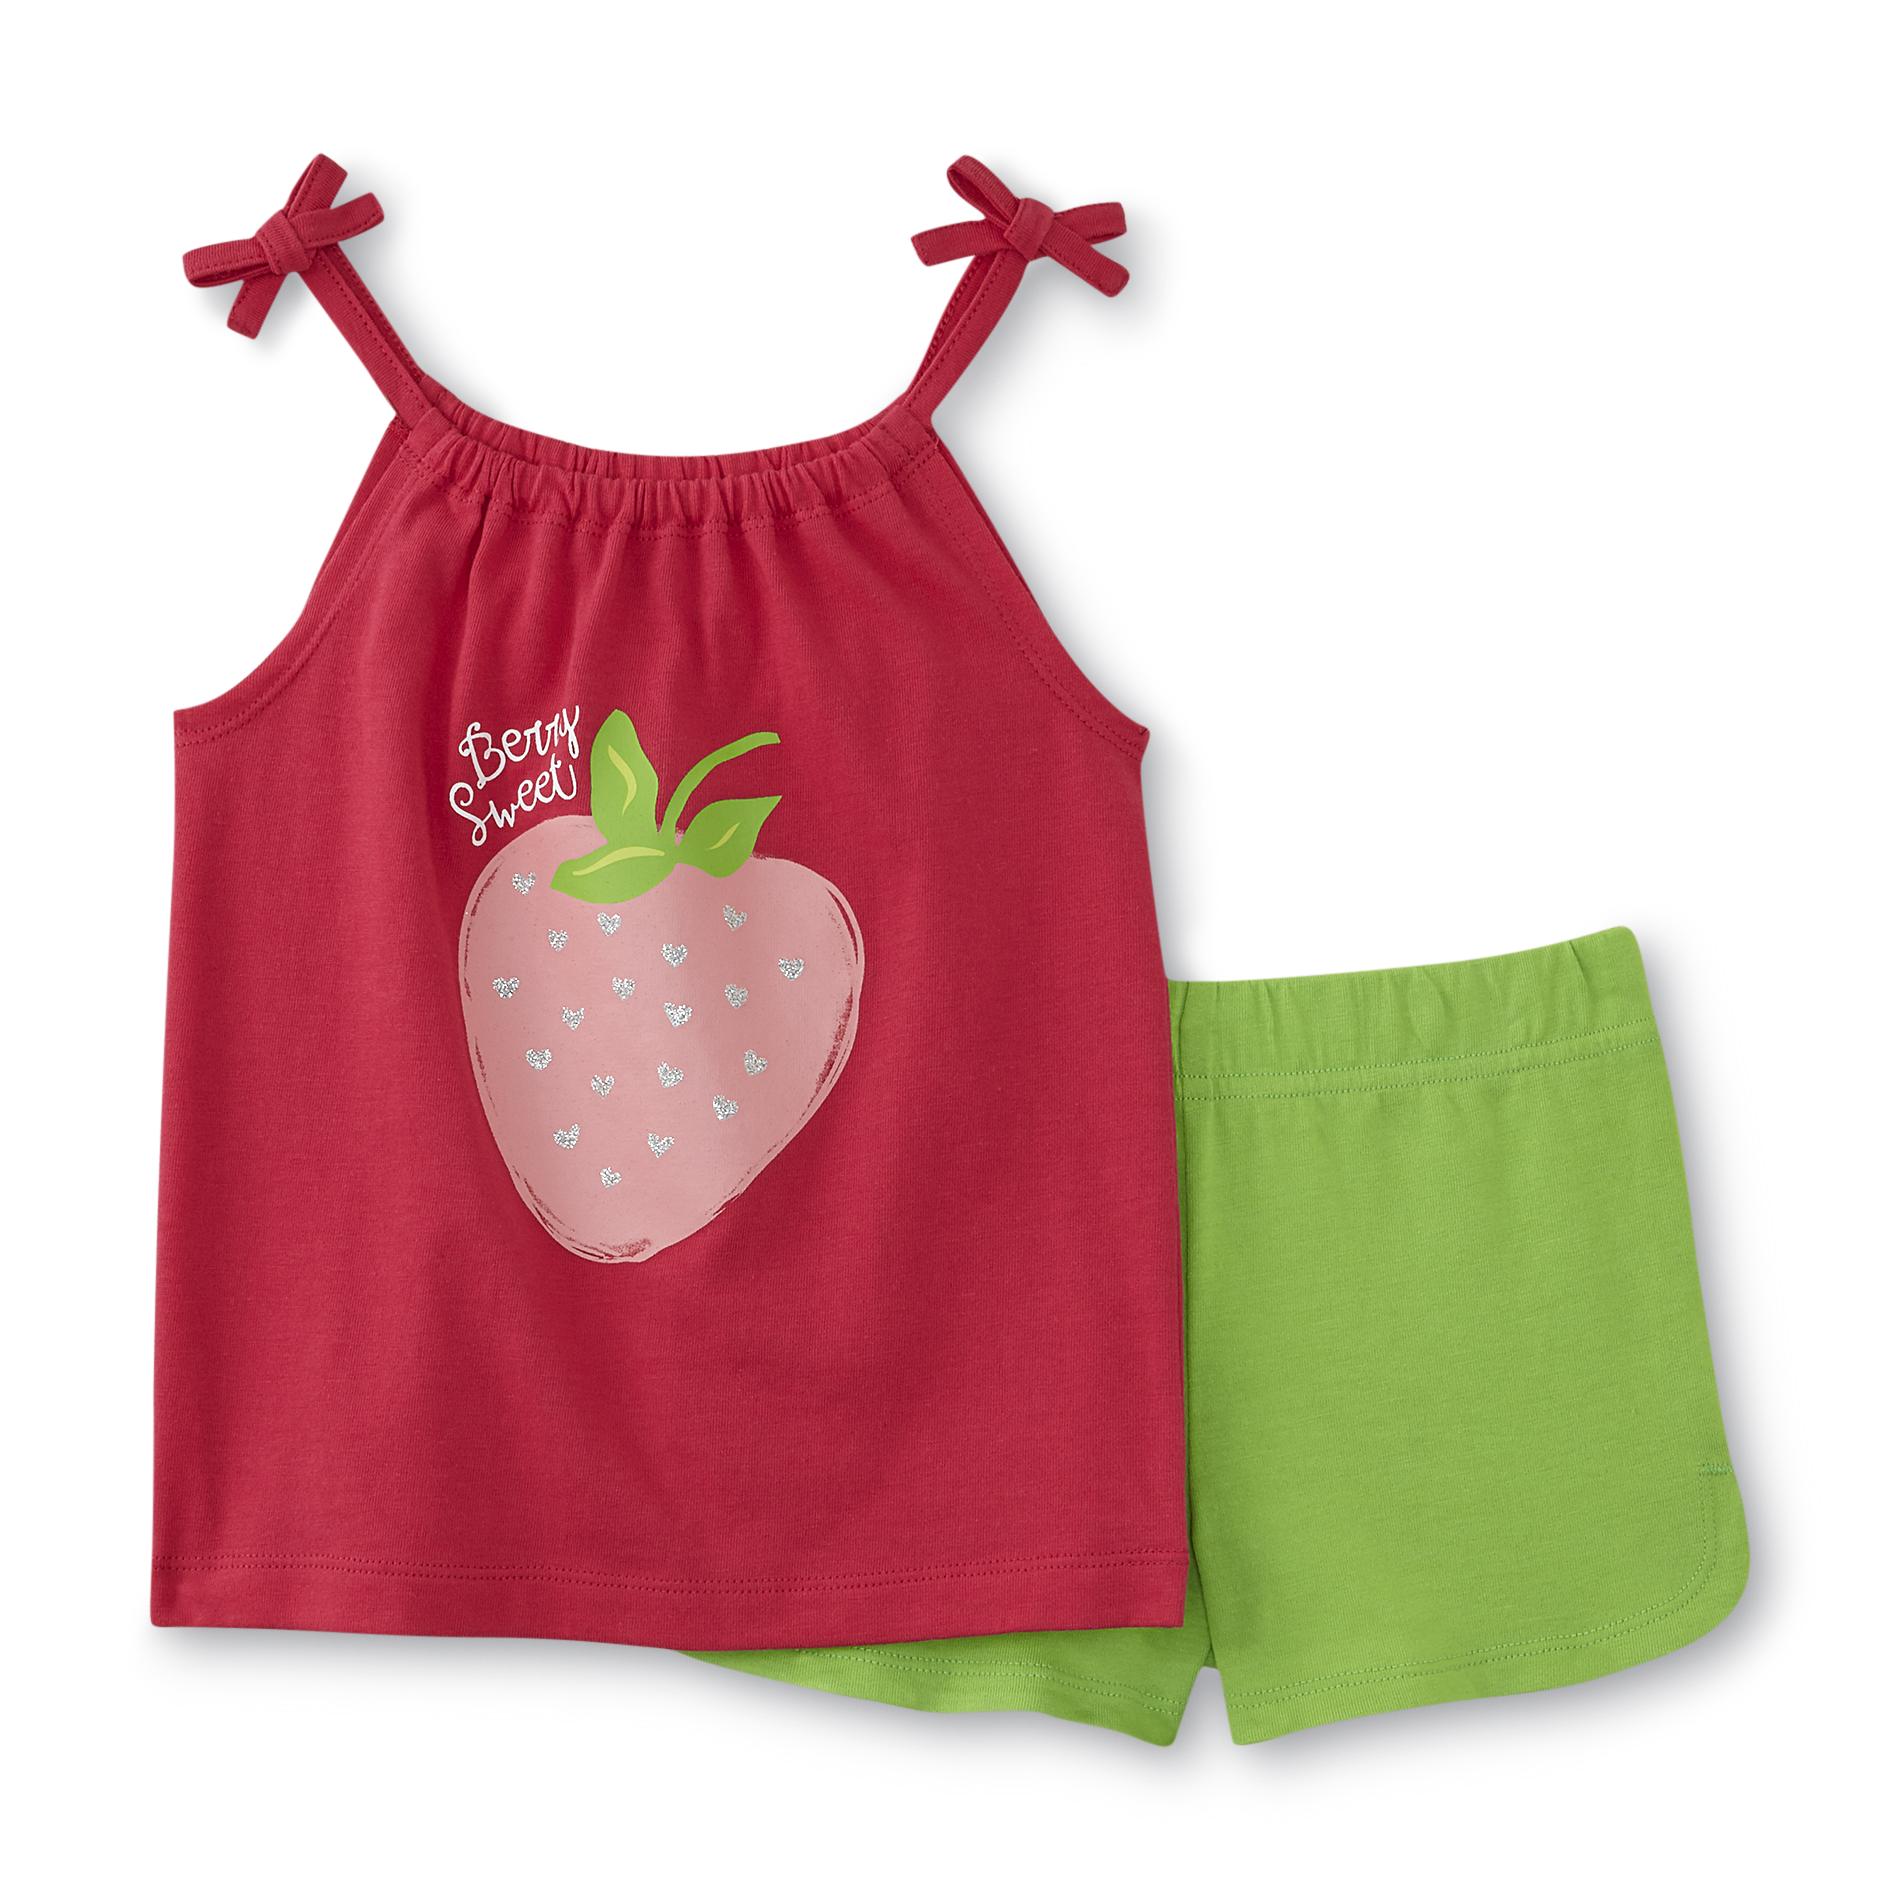 Infant & Toddler Girl's Tank Top & Shorts - Berry Sweet